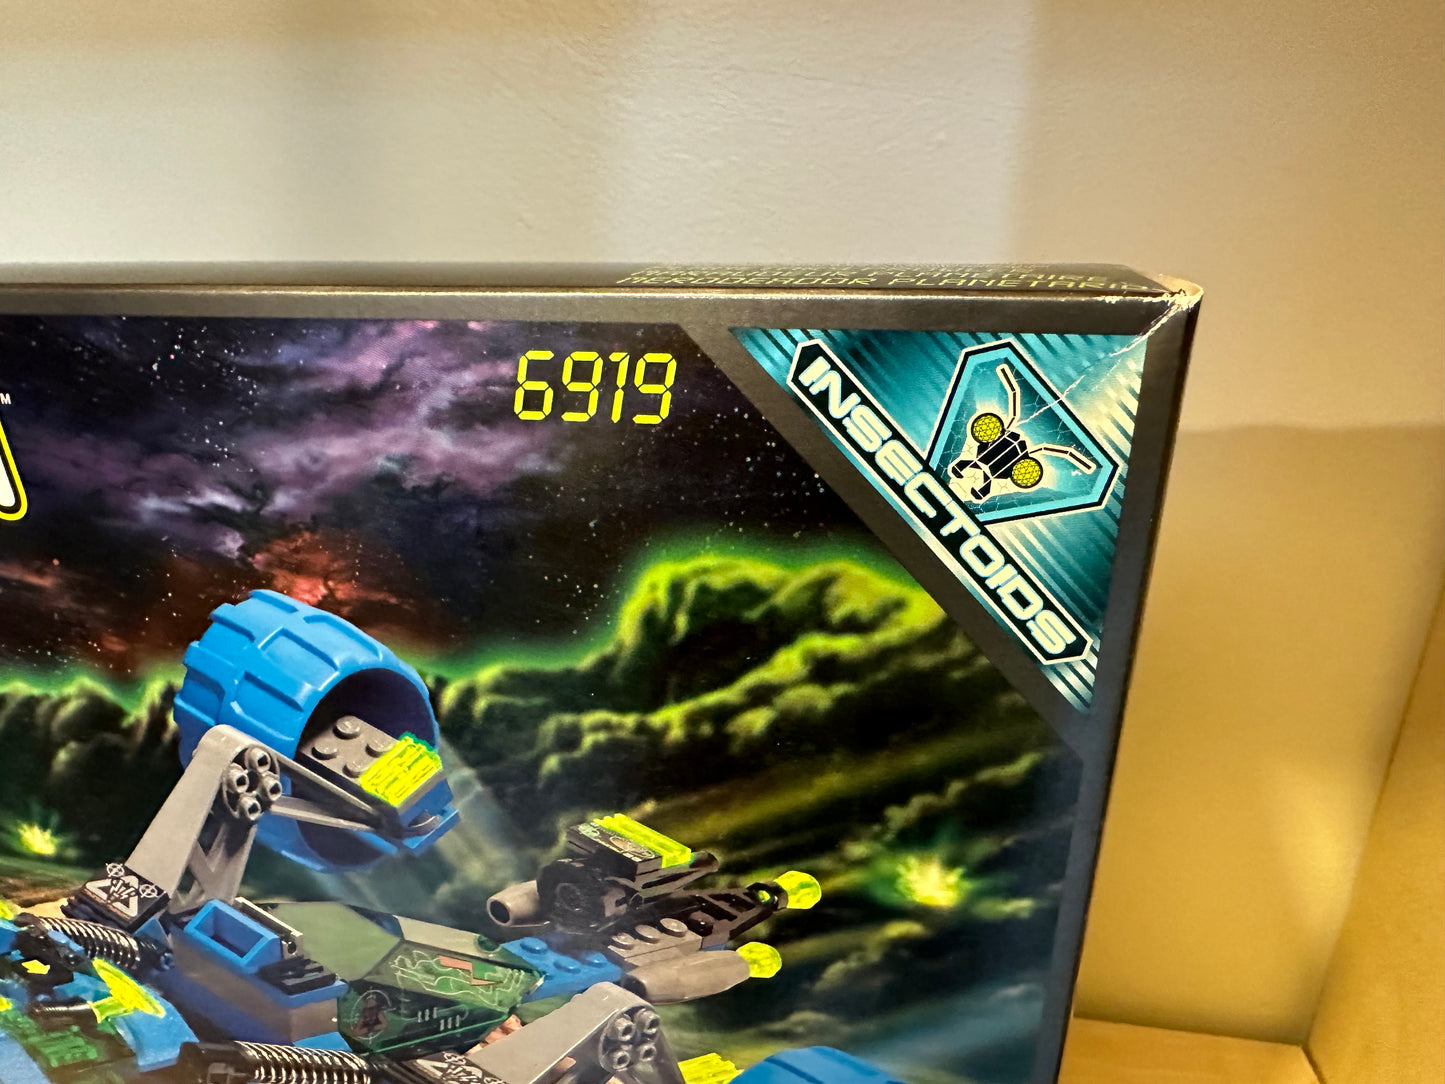 Lego 6919 Planetary Prowler Insectoids MISB 1998 Space Legos